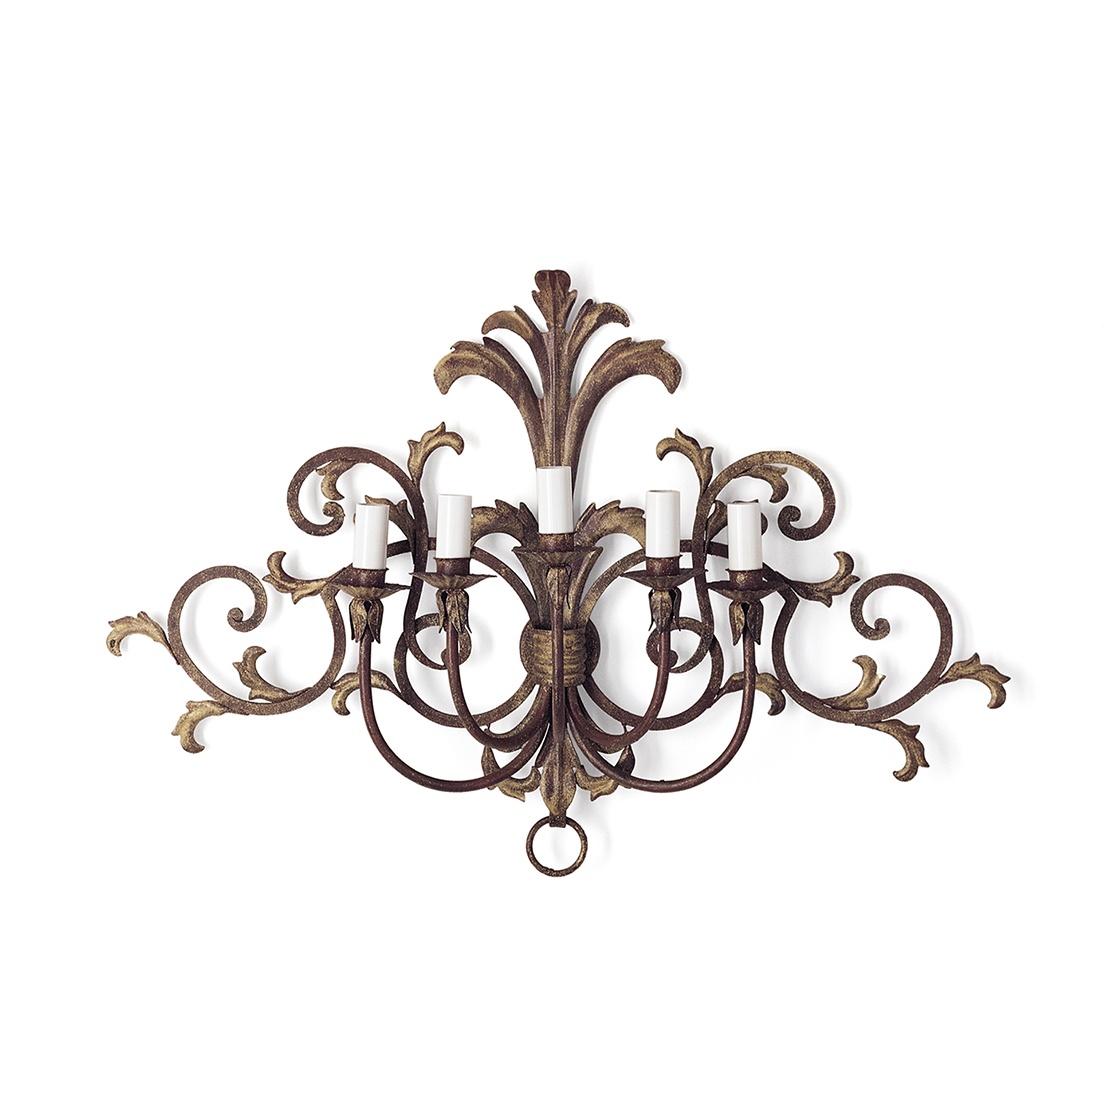 Siena wall light in Wrought iron - Beaumont & Fletcher